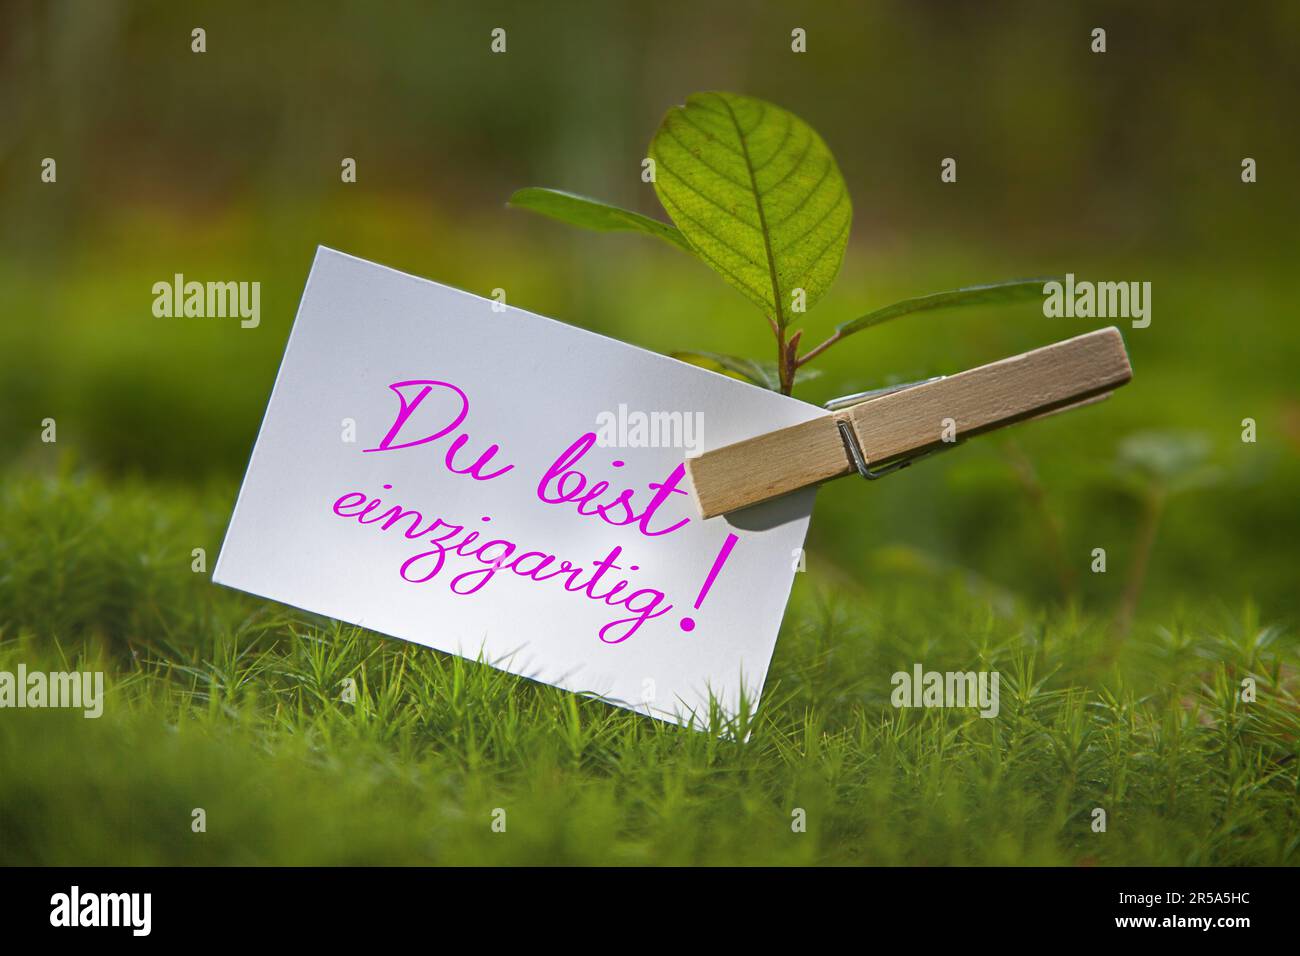 seedling on a meadow with piece of paper lettering Du bist einzigartig, You are unique Stock Photo